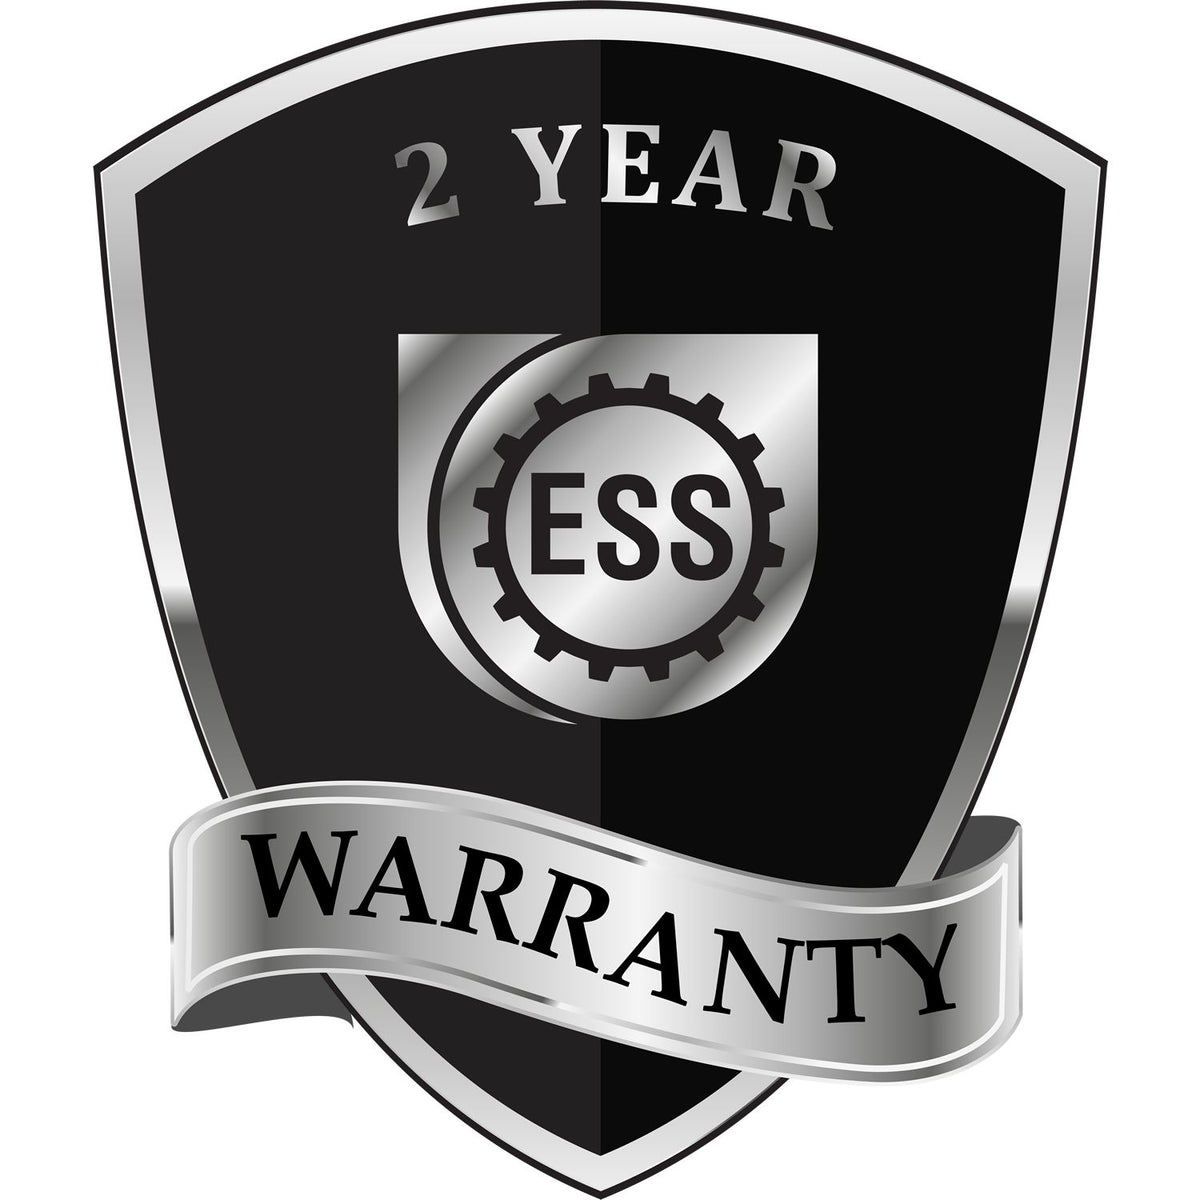 A badge or emblem showing a warranty icon for the Long Reach Mississippi Land Surveyor Seal